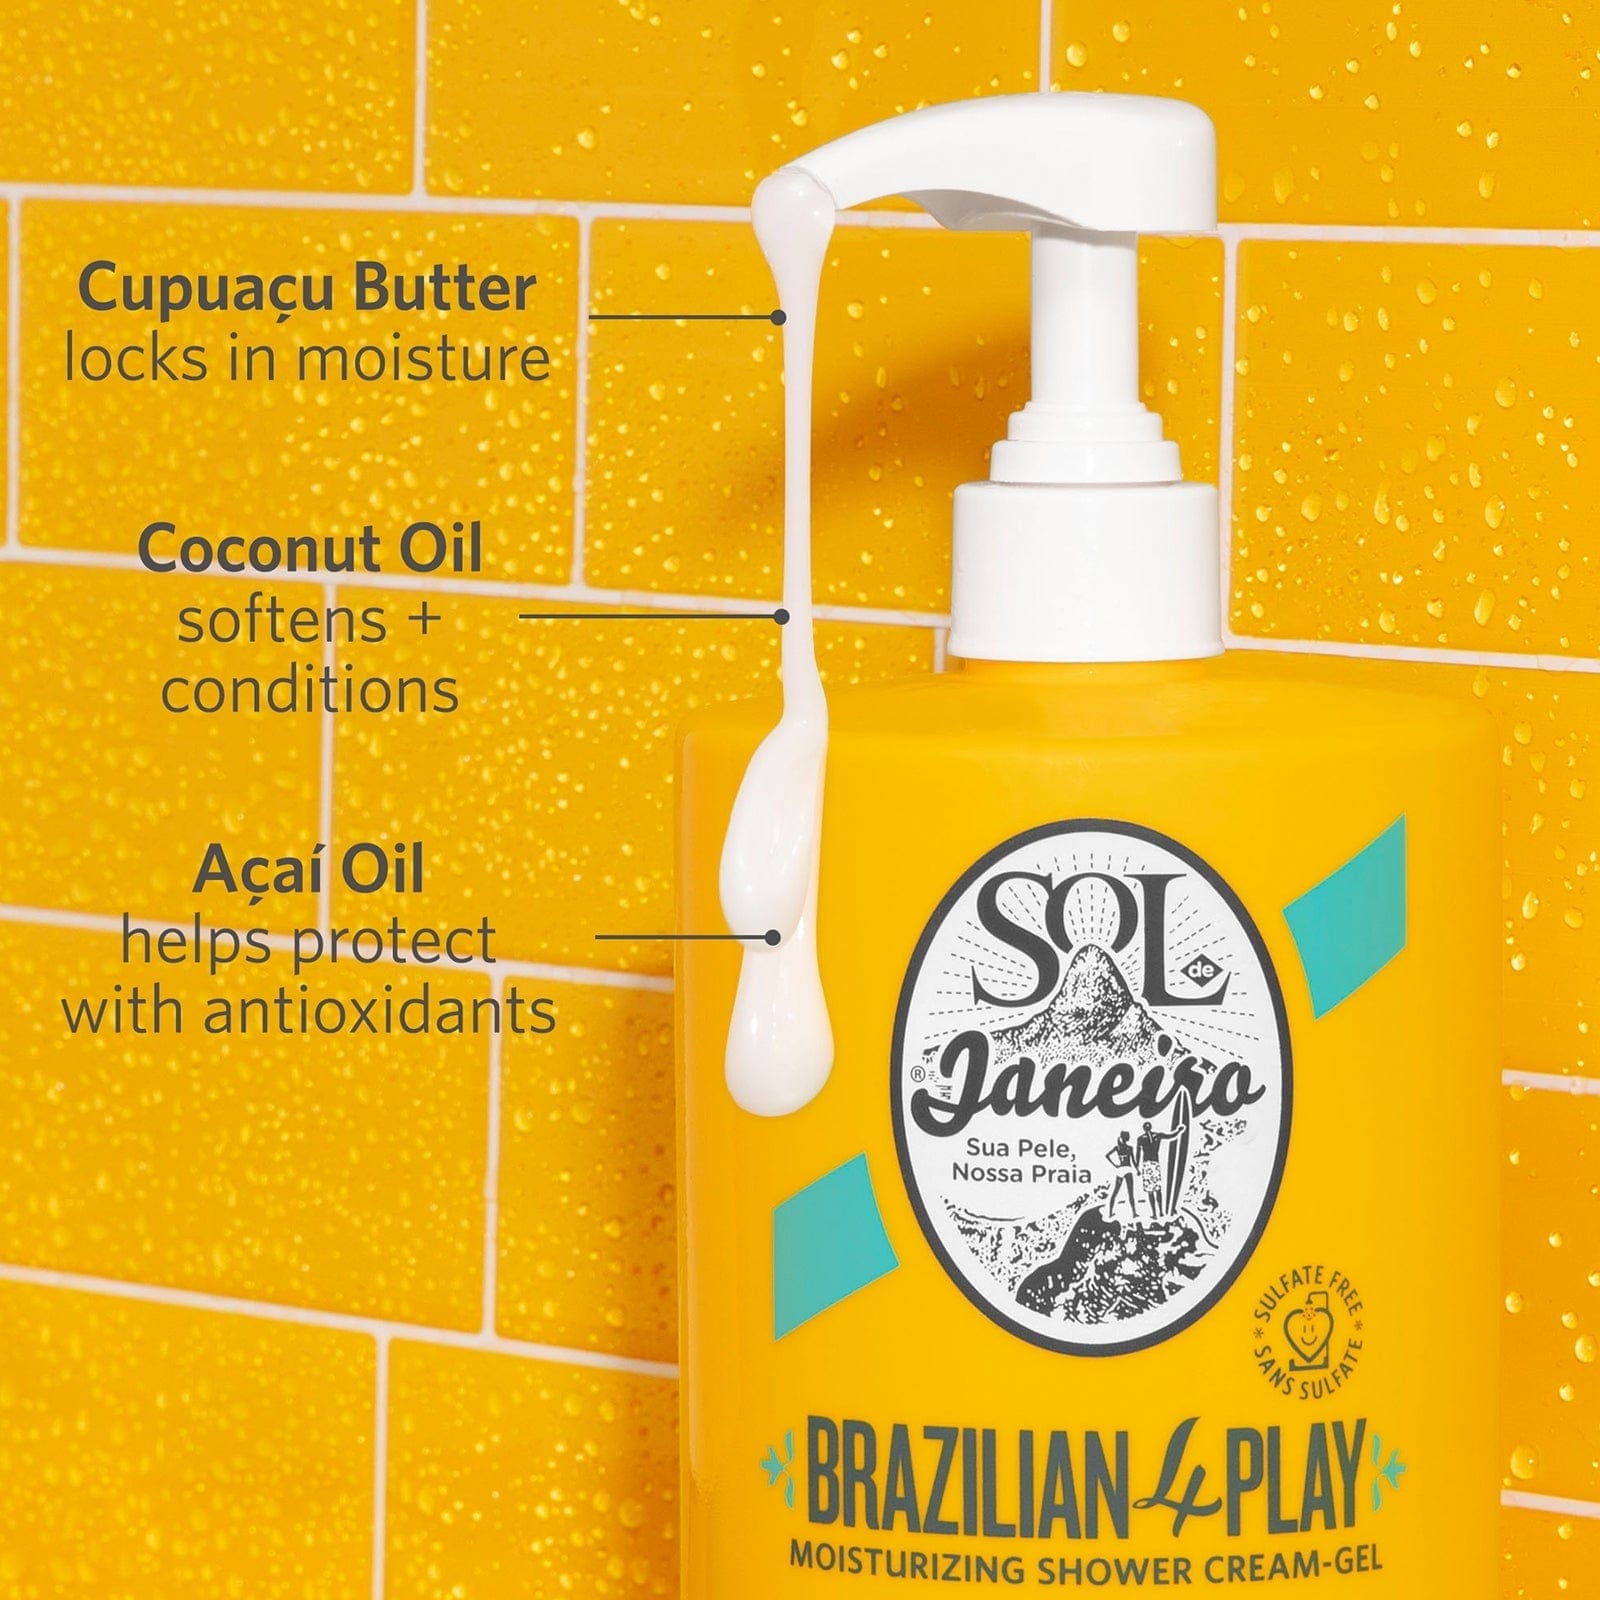 Cupuacu butter - locks in moisture, coconut oil - softens + conditions, acai oil - helps protect with antioxidants